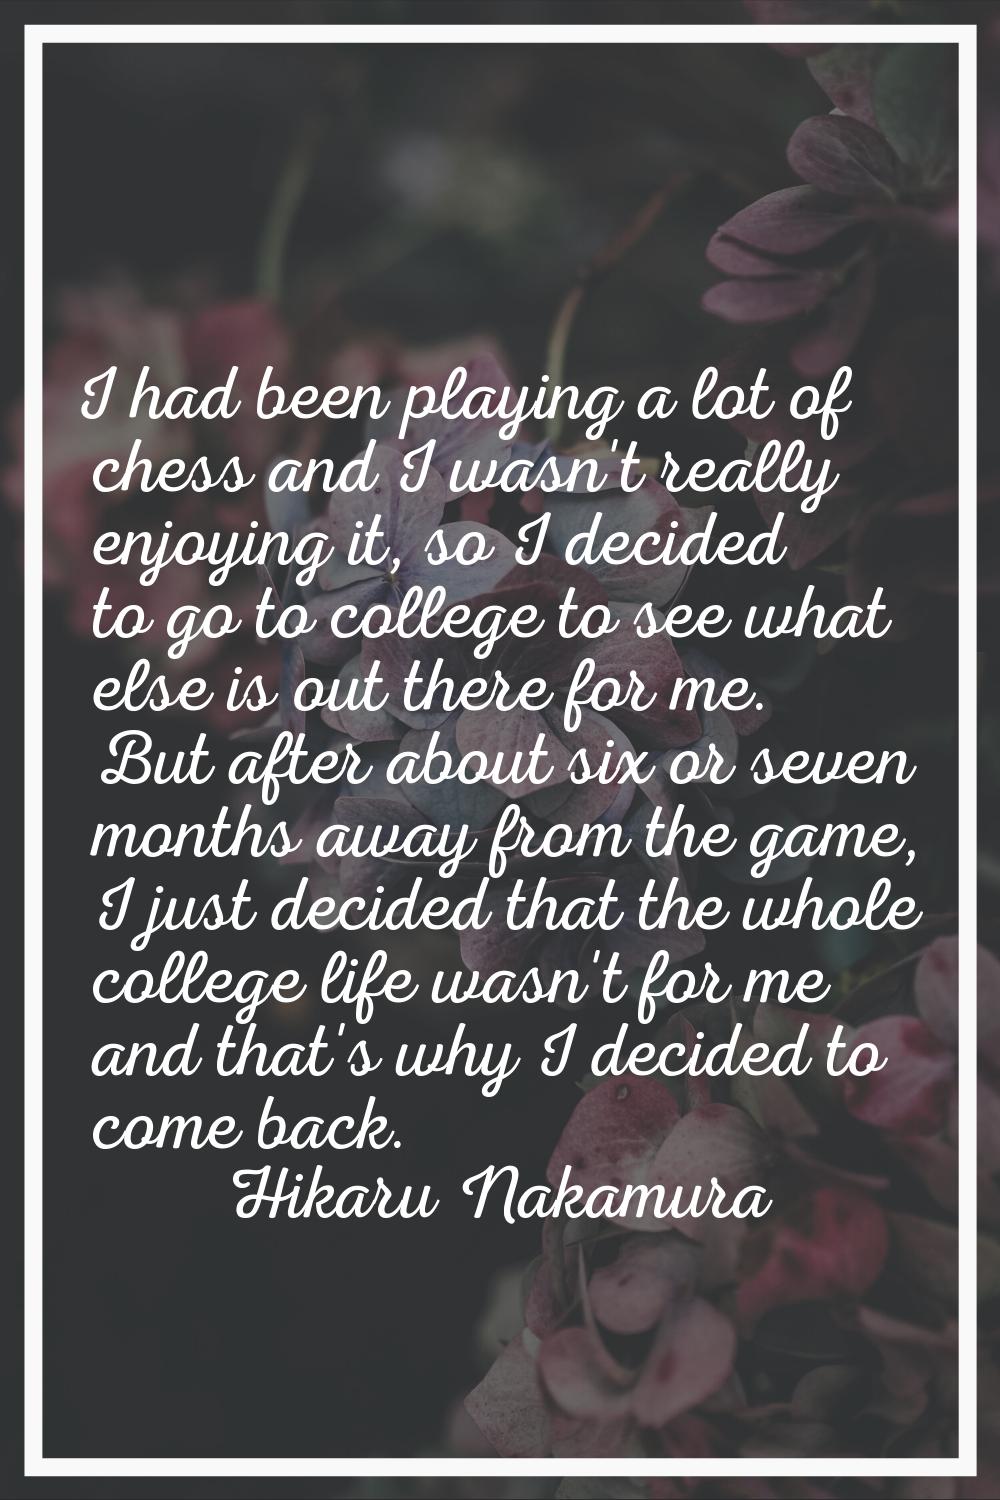 I had been playing a lot of chess and I wasn't really enjoying it, so I decided to go to college to